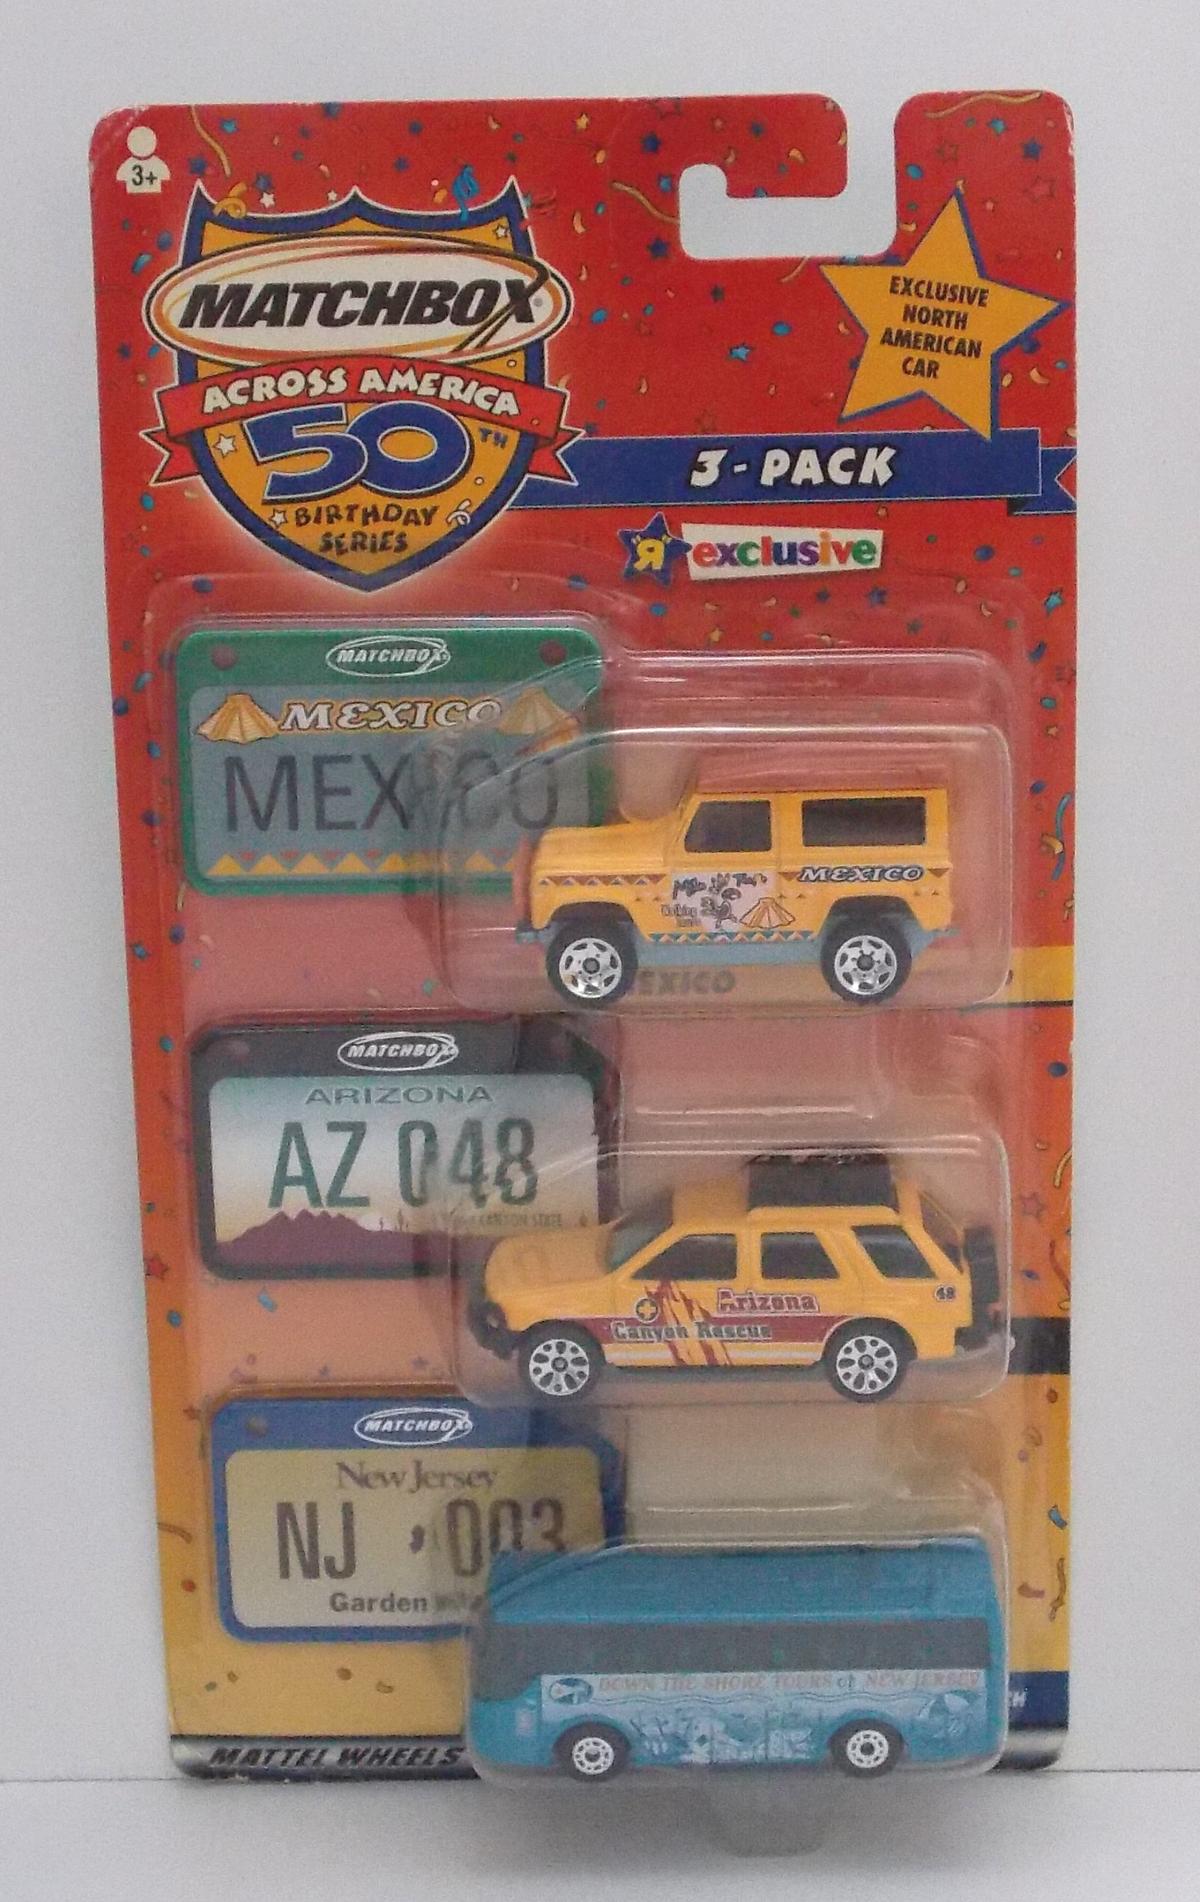 Matchbox Across America Mexico, Arizona, New Jersey 50th Anniversary Toys'R'Us Exclusive Gift Set